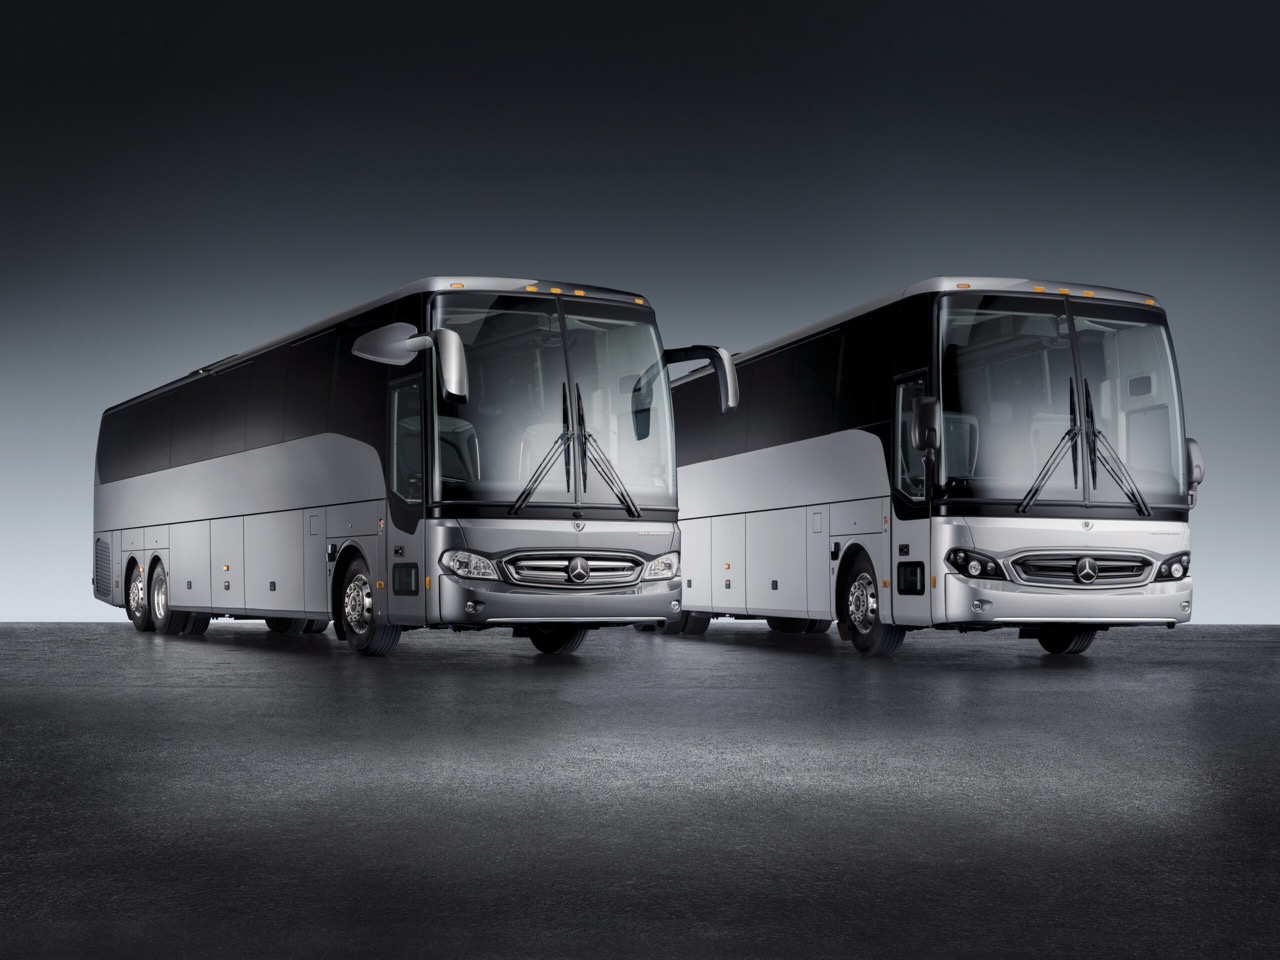 Comparing Luxury Coaches vs Standard Coaches: What's the Difference?